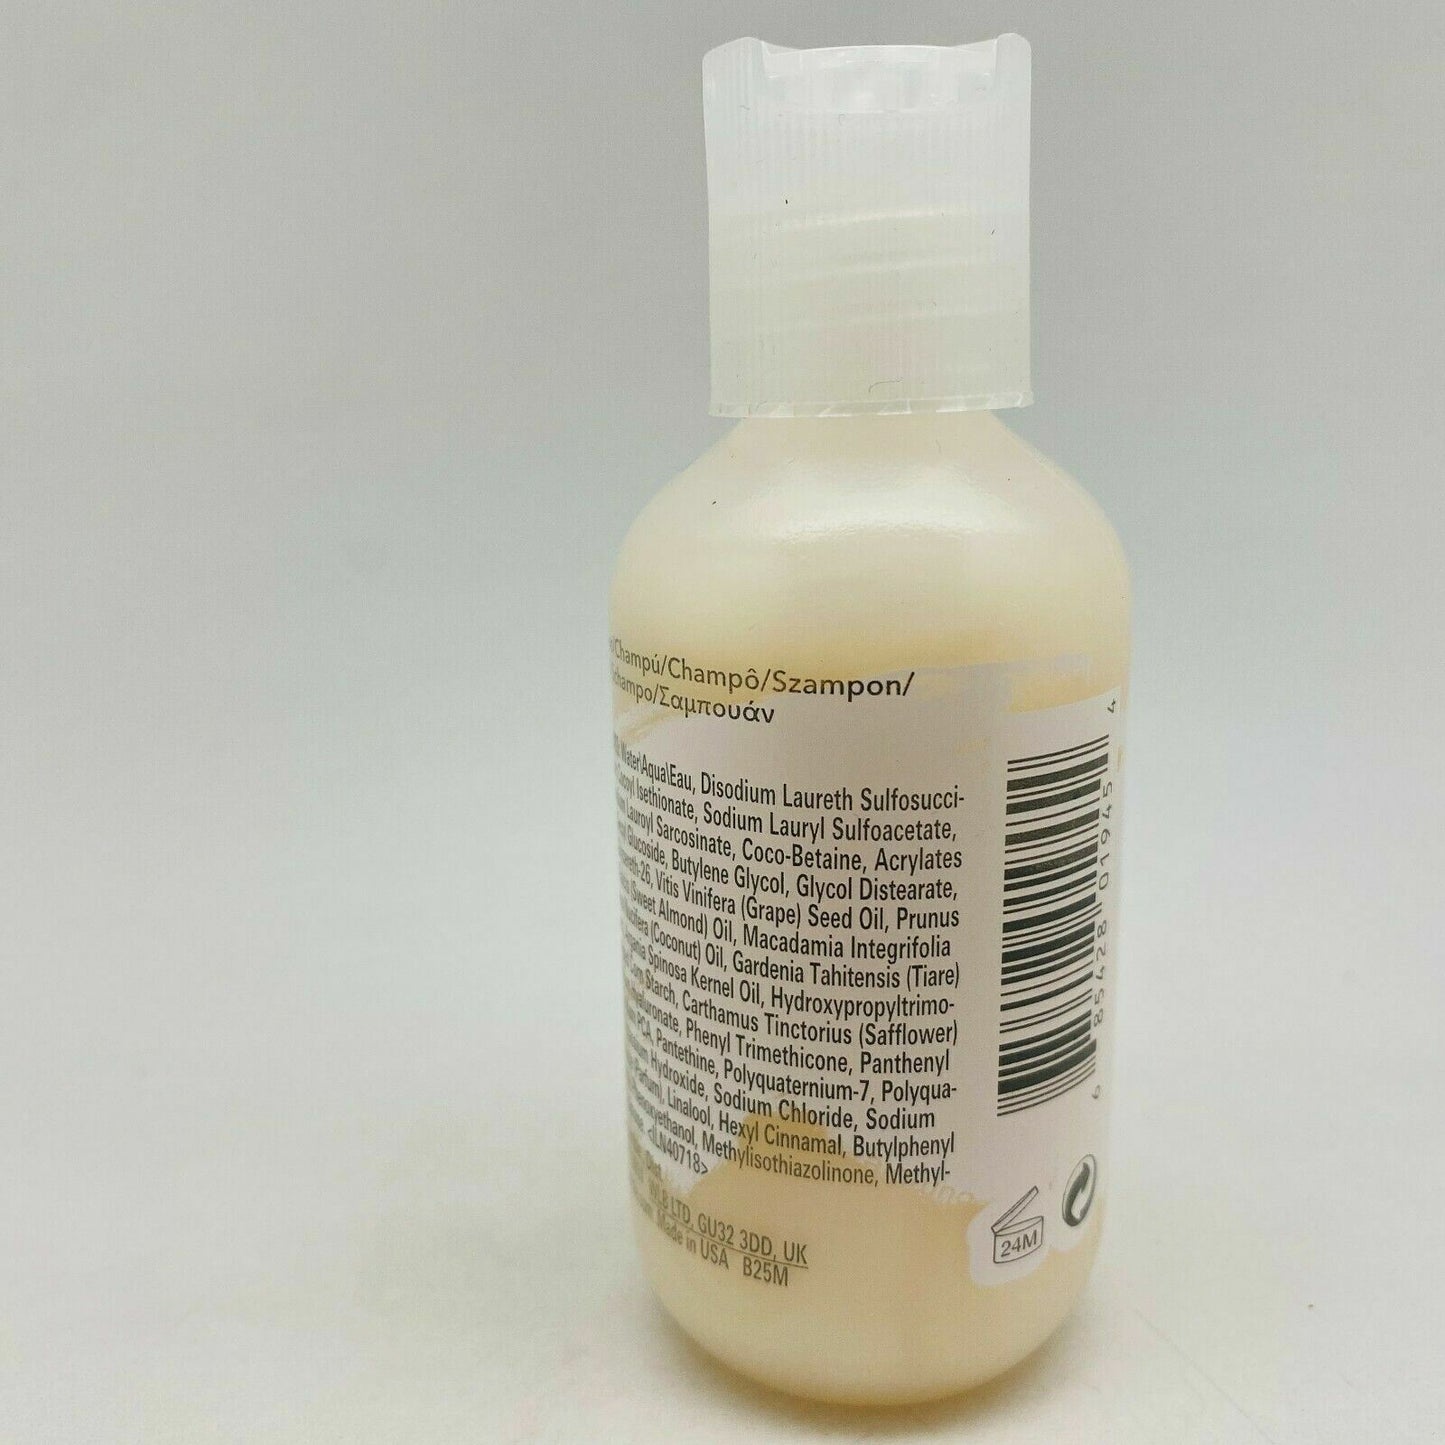 Bumble And Bumble Hairdresser's Invisible Oil Shampoo - 2 oz - NWOB